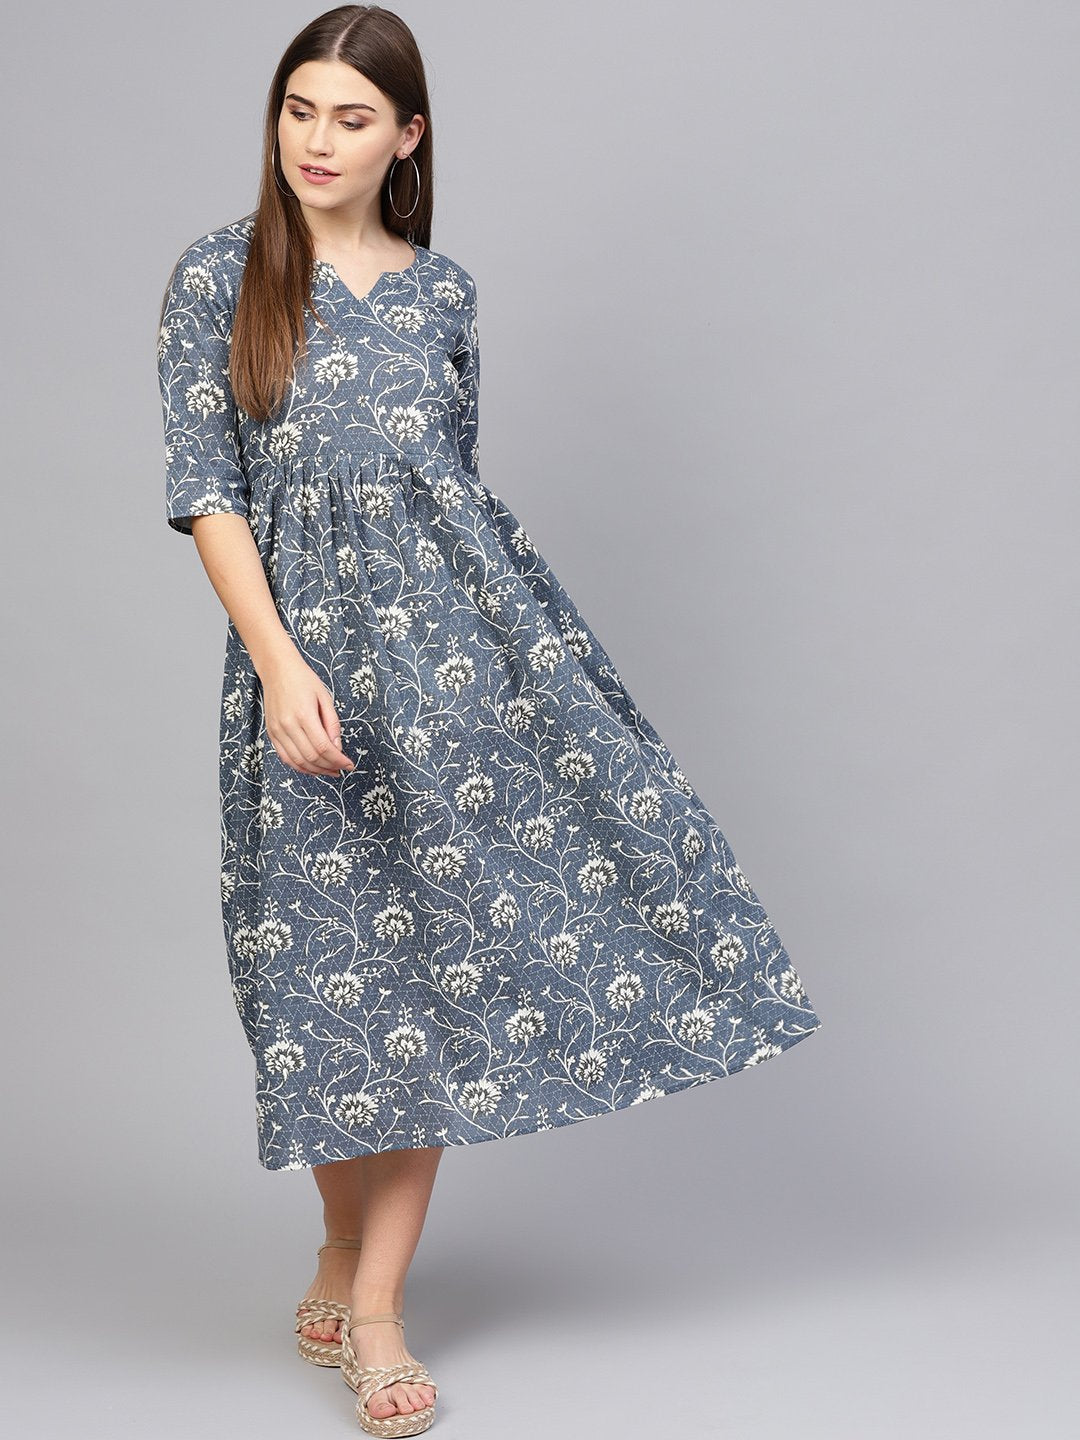 Women's Navy Blue & Off-White Printed A-Line Dress - Nayo Clothing